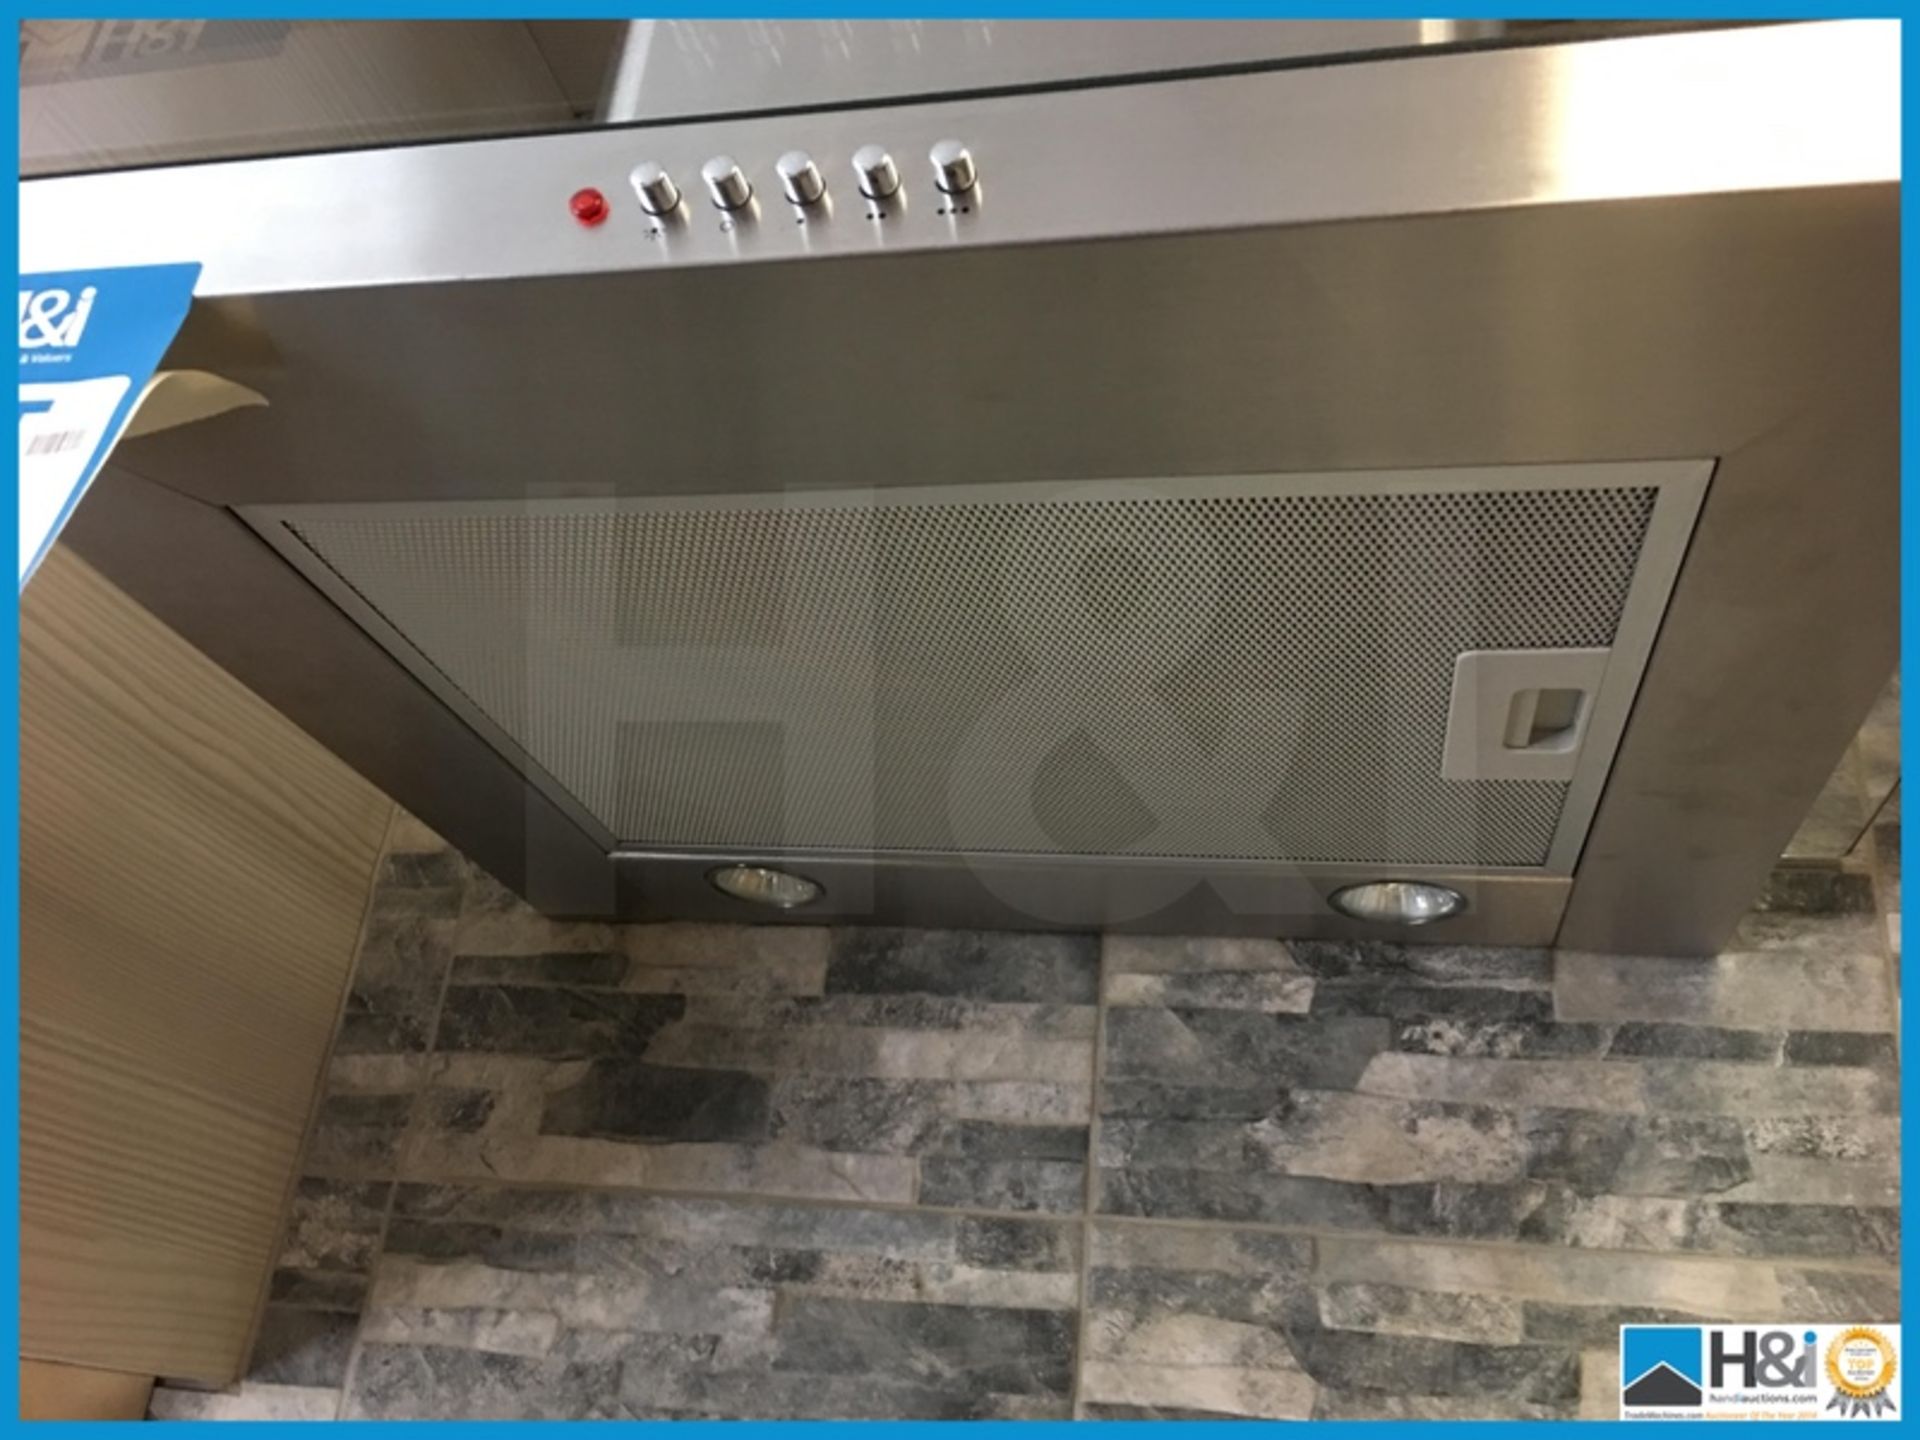 Designer brushed steel and glass CDA ECN6 600 extractor. New and unused Appraisal: Excellent - Image 2 of 3